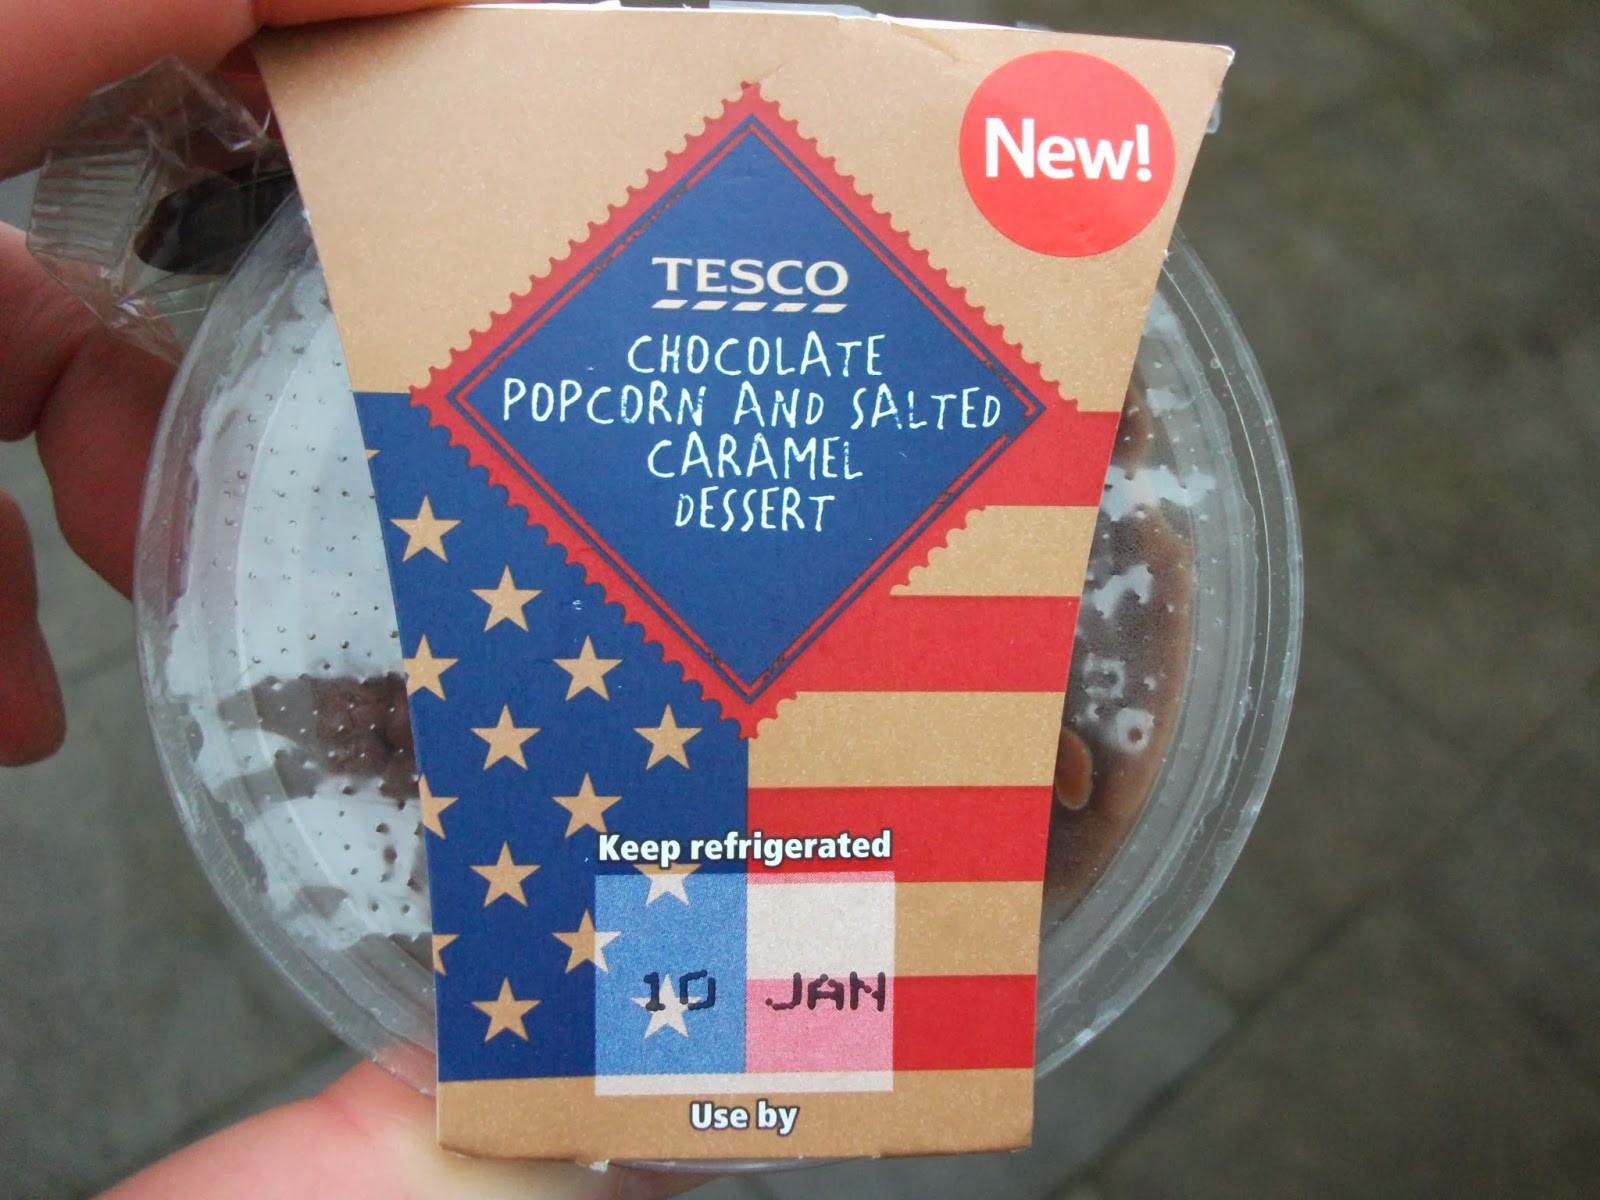 Tesco Chocolate Popcorn And Salted Caramel Dessert Review